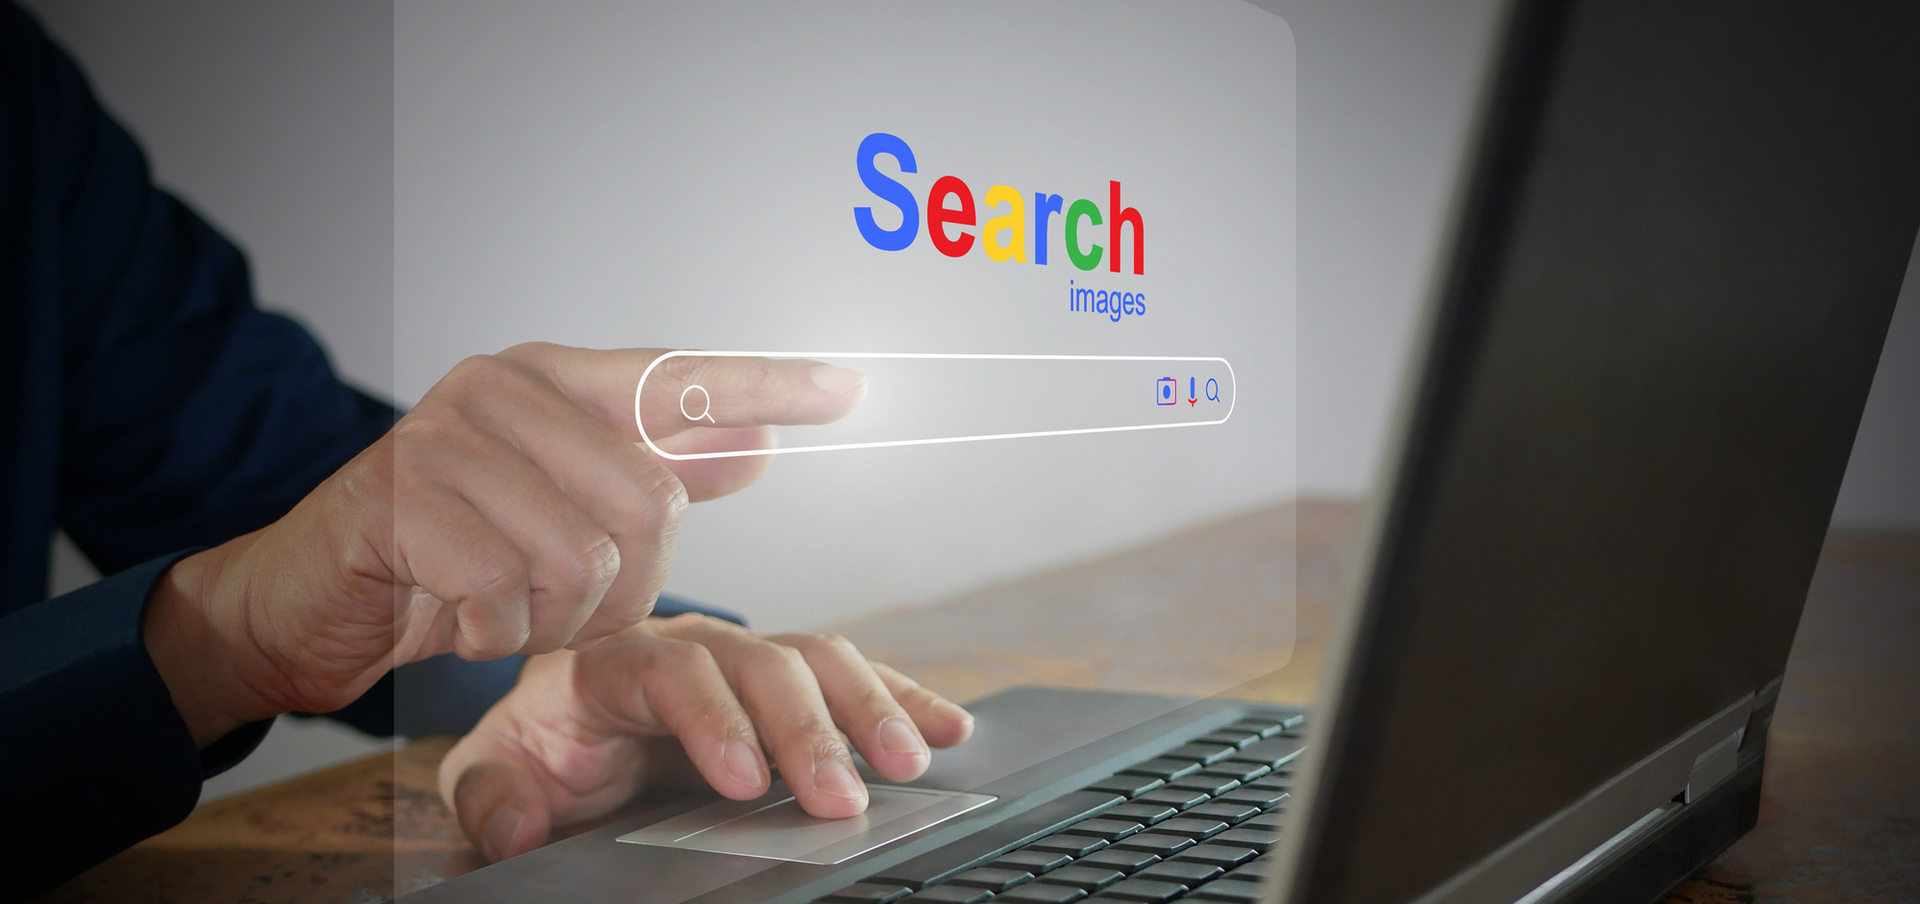 A person sat at a desk browsing the web, making a google search